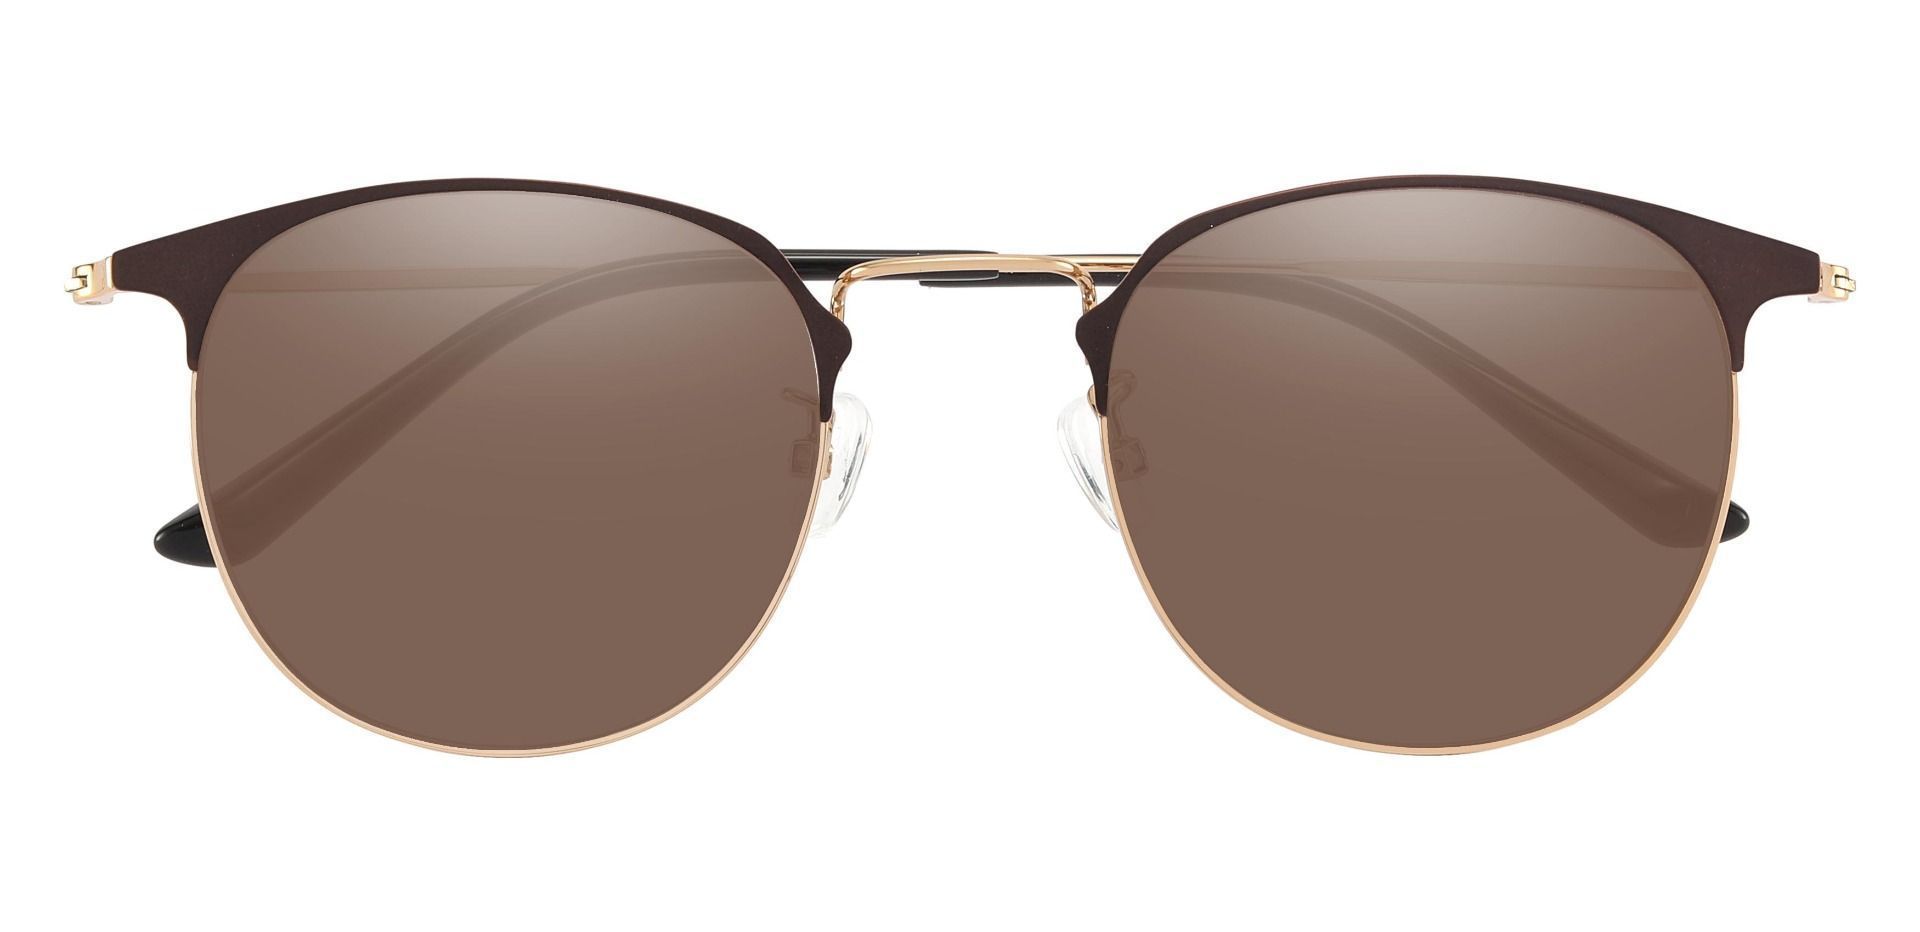 Tilton Browline Non-Rx Sunglasses - Brown Frame With Brown Lenses